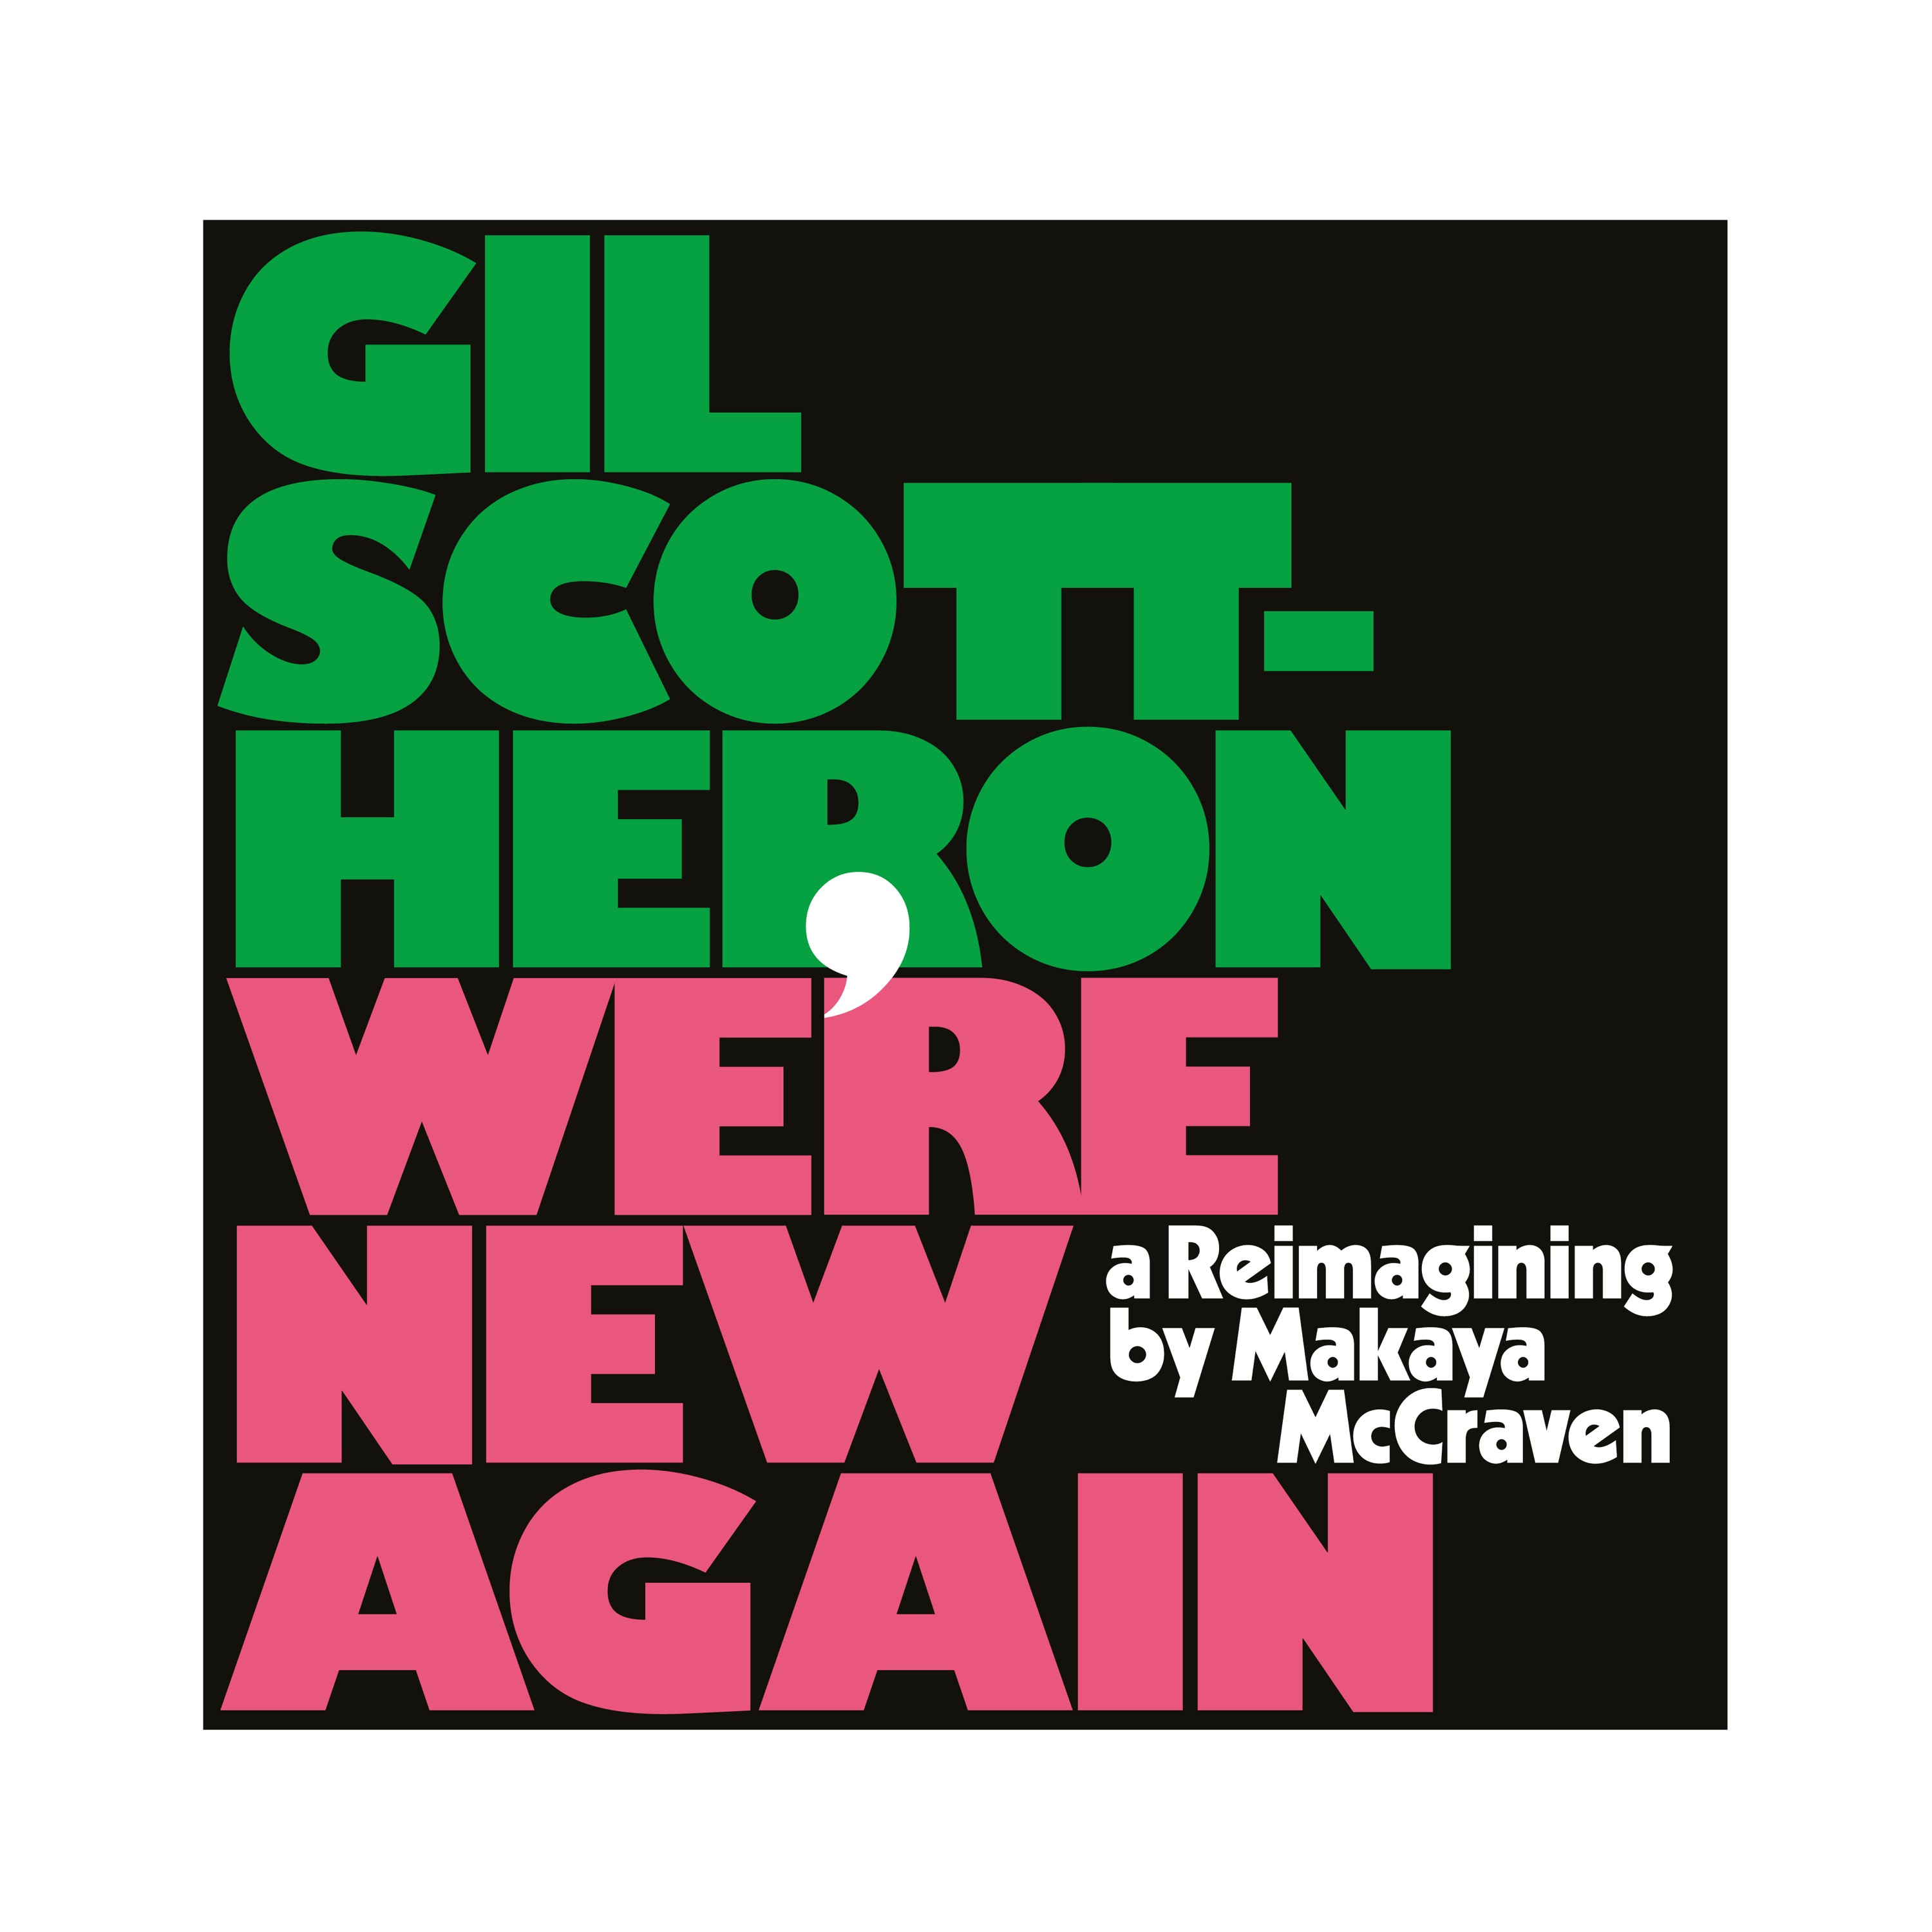 Gil Scott-Heron - We're New Again (A Reimagining by M